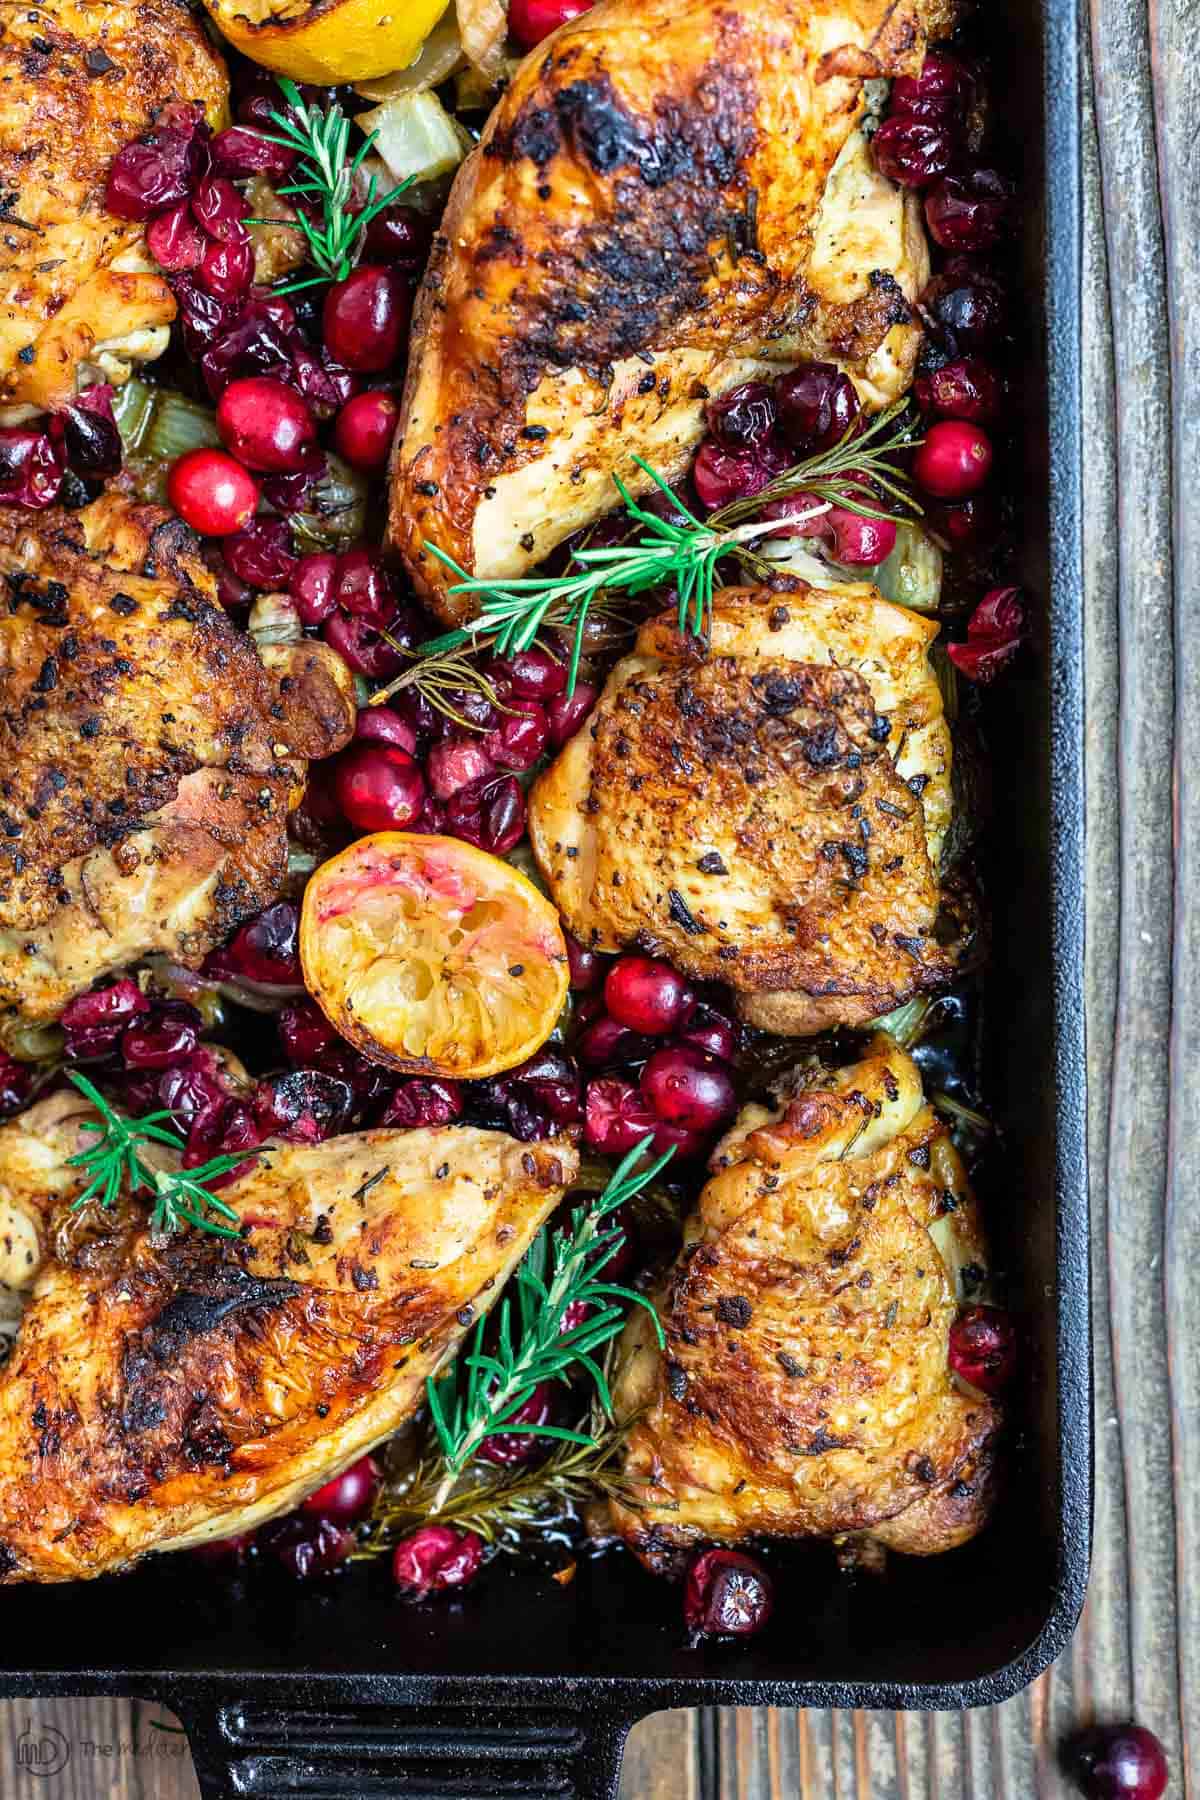 Baked chicken with rosemary and cranberries in a baking dish